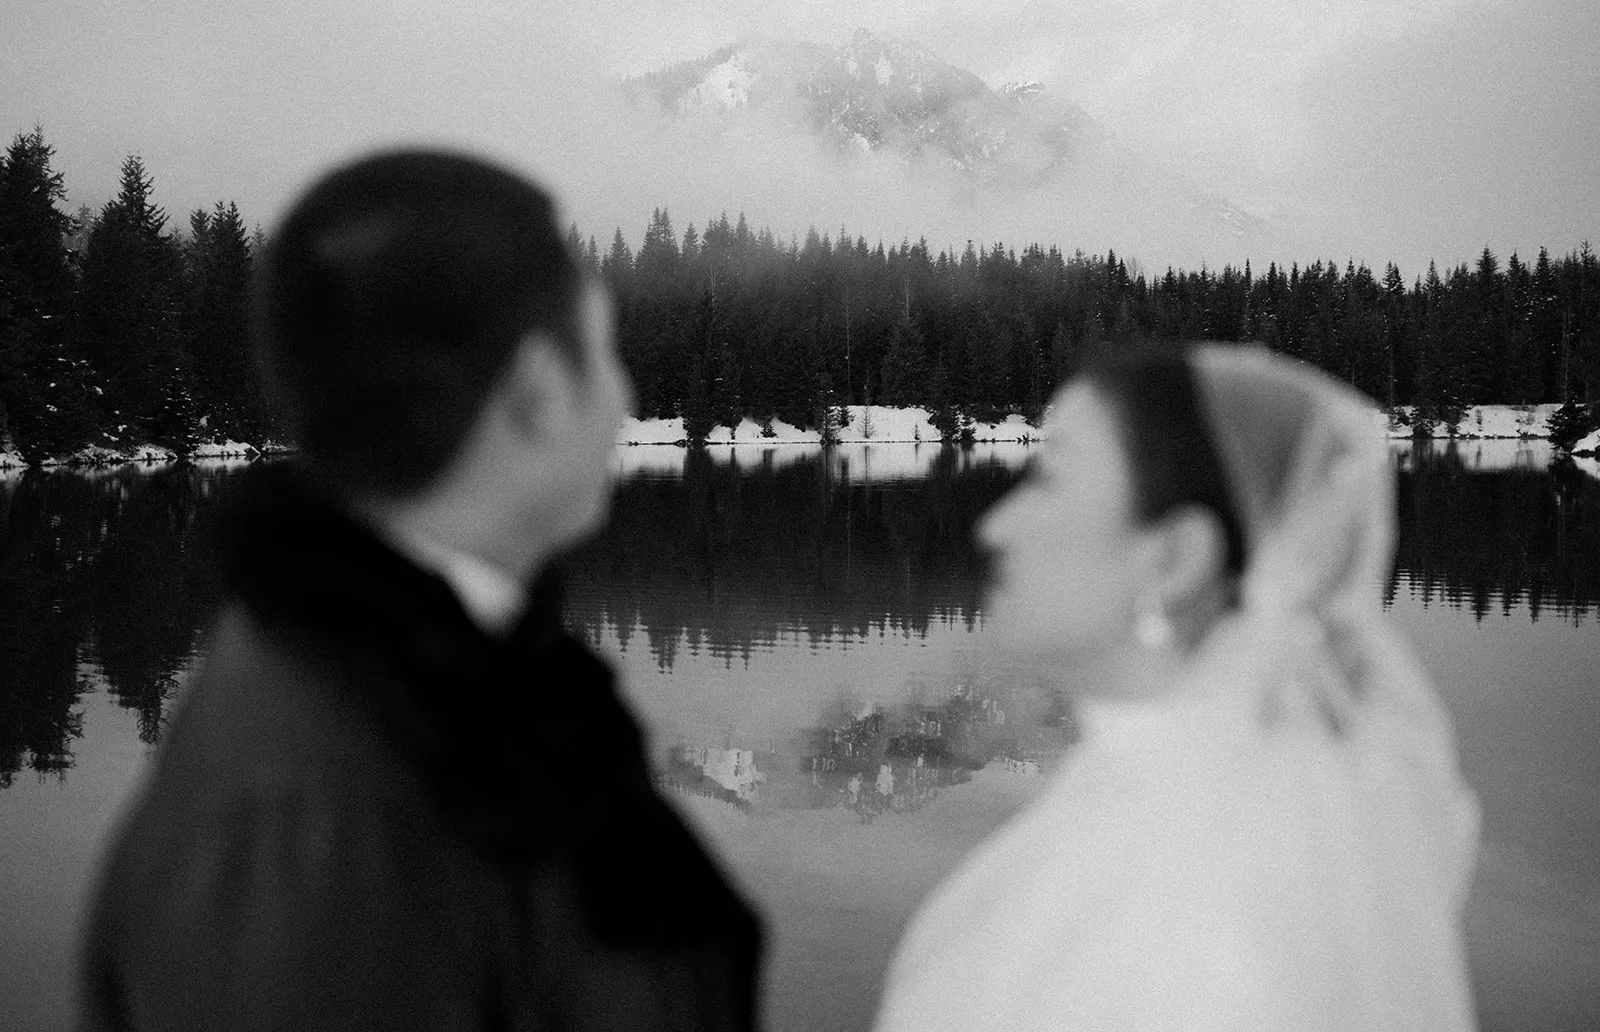 A black and white photo capturing the profiles of a bride and groom at majestic mountain lake.